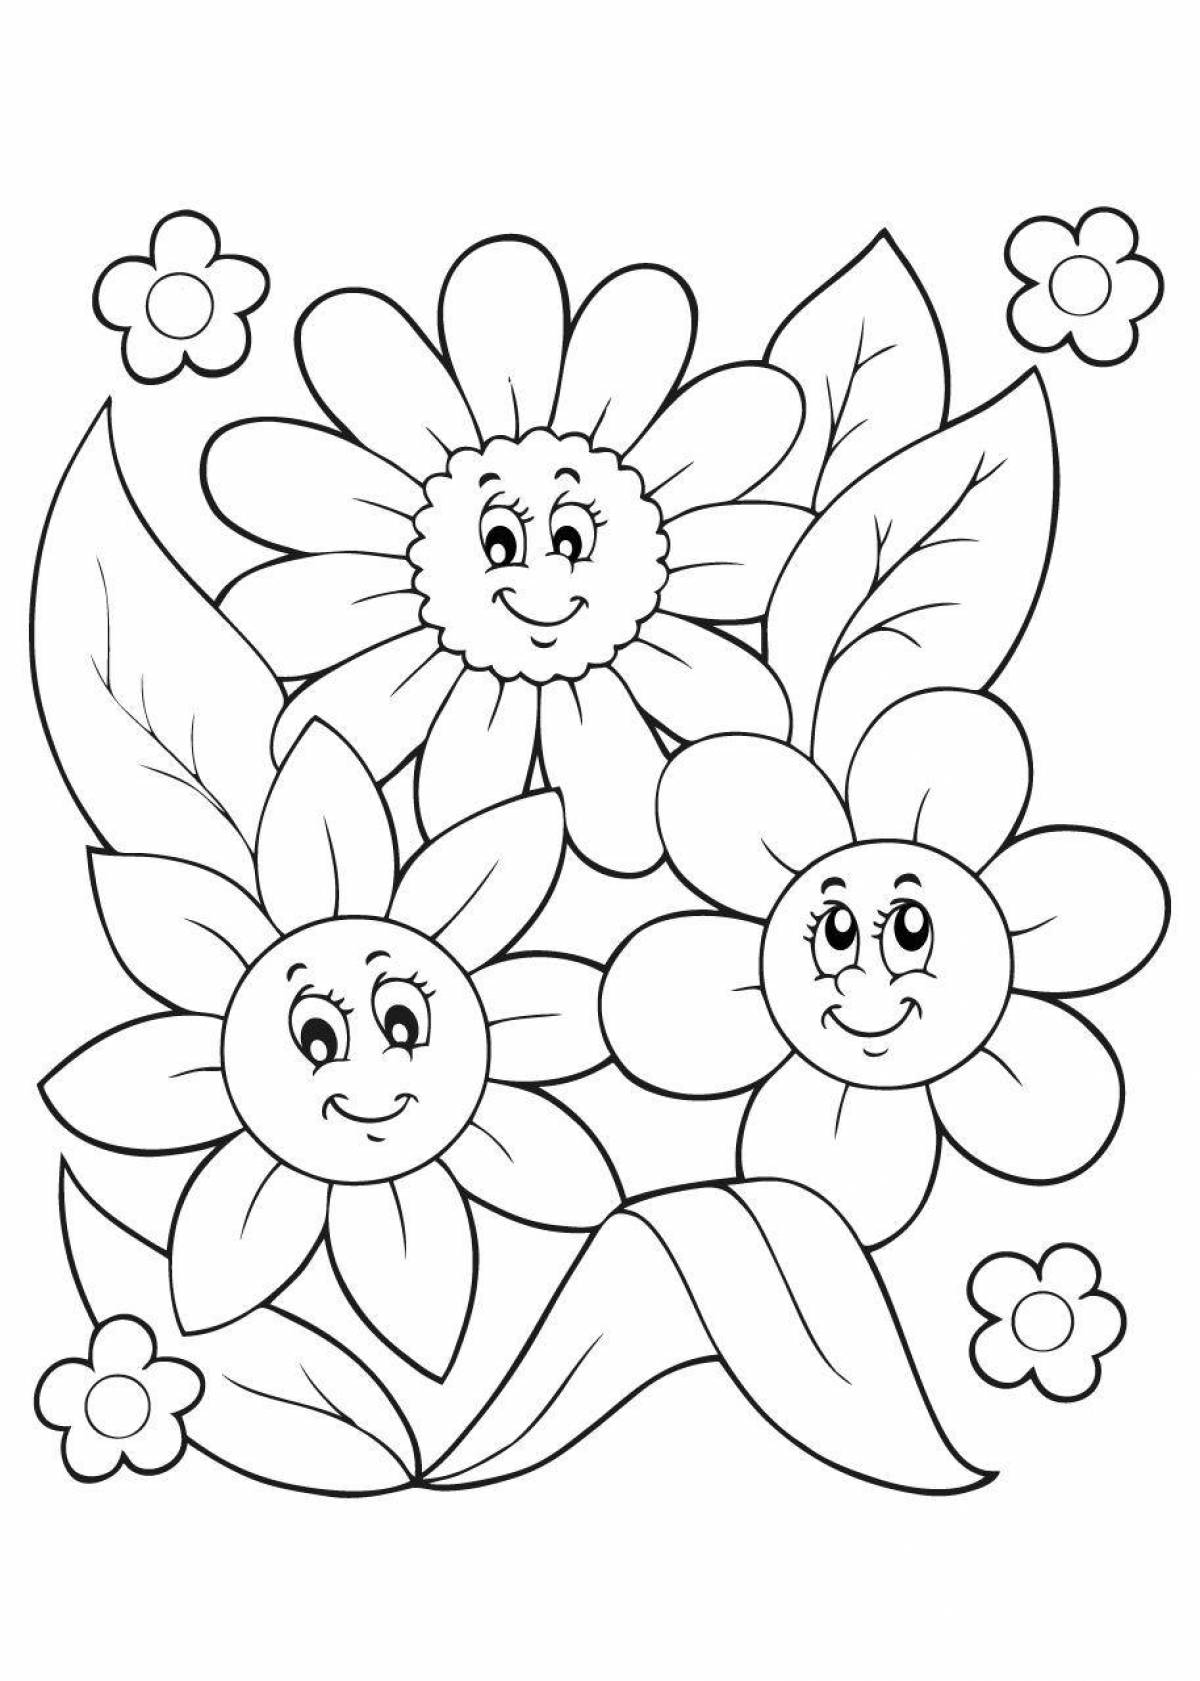 Radiant coloring flower for children 5-6 years old